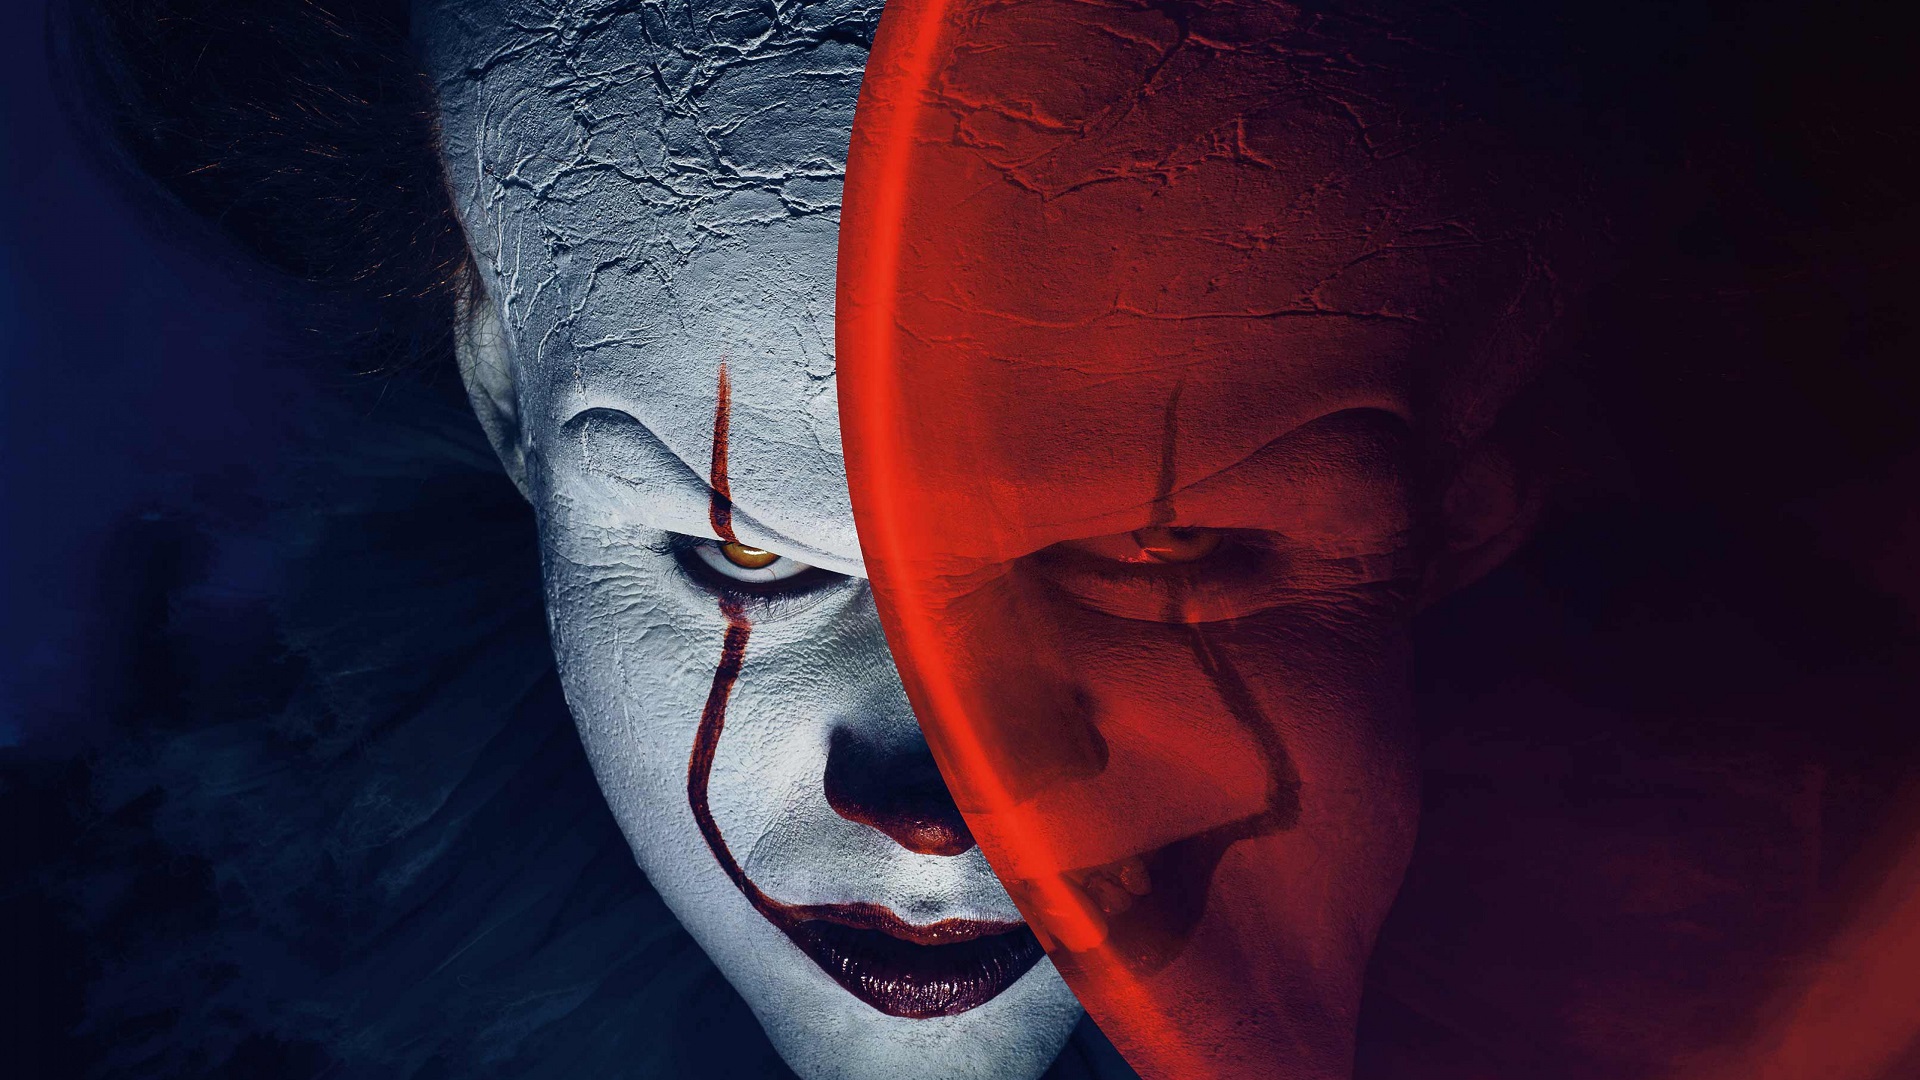 9. It: Chapter Two